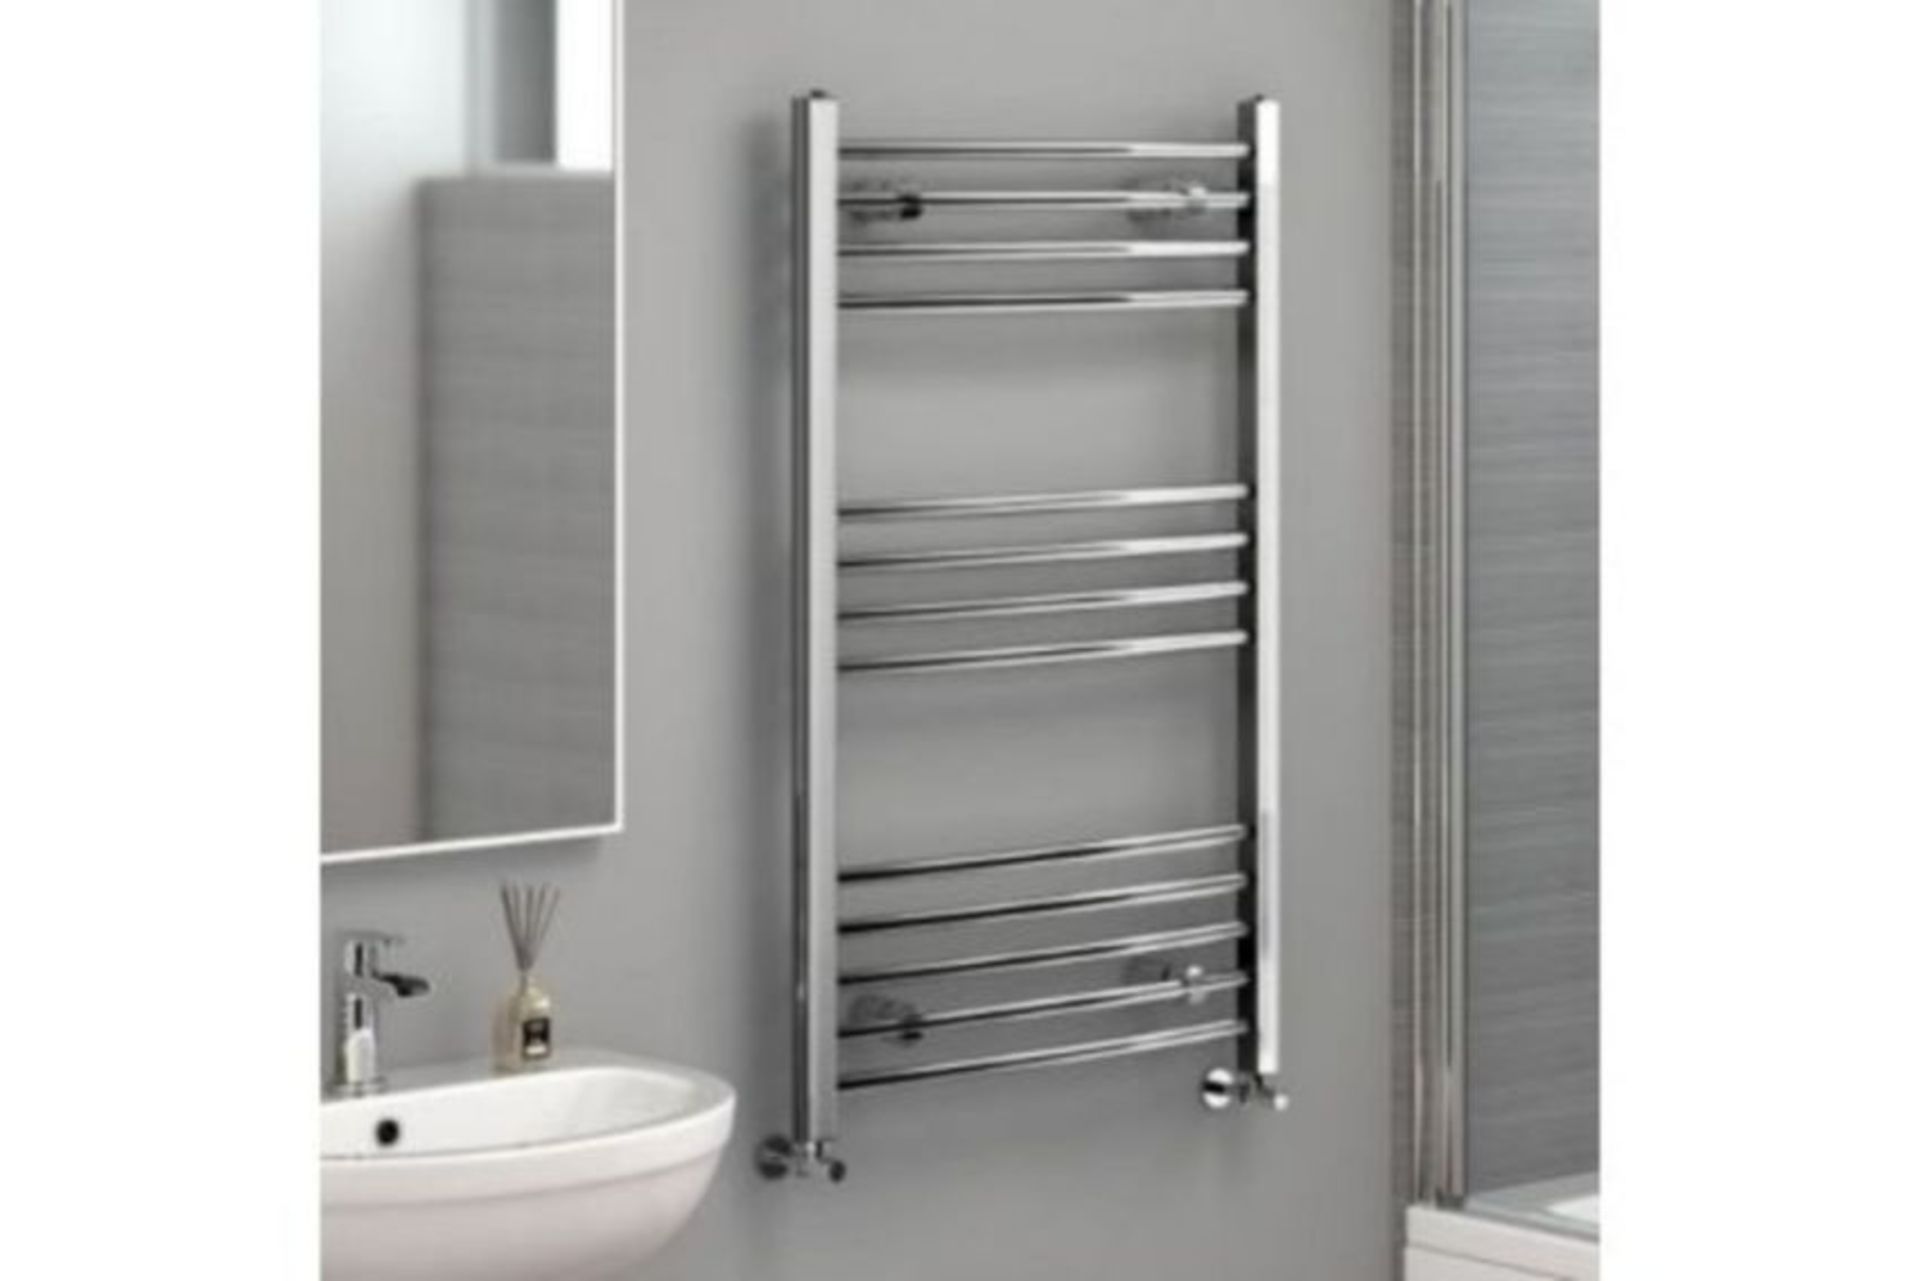 NEW 1200x500mm - 20mm Tubes - RRP £219.99.Chrome Curved Rail Ladder Towel Radiator.Our Nancy